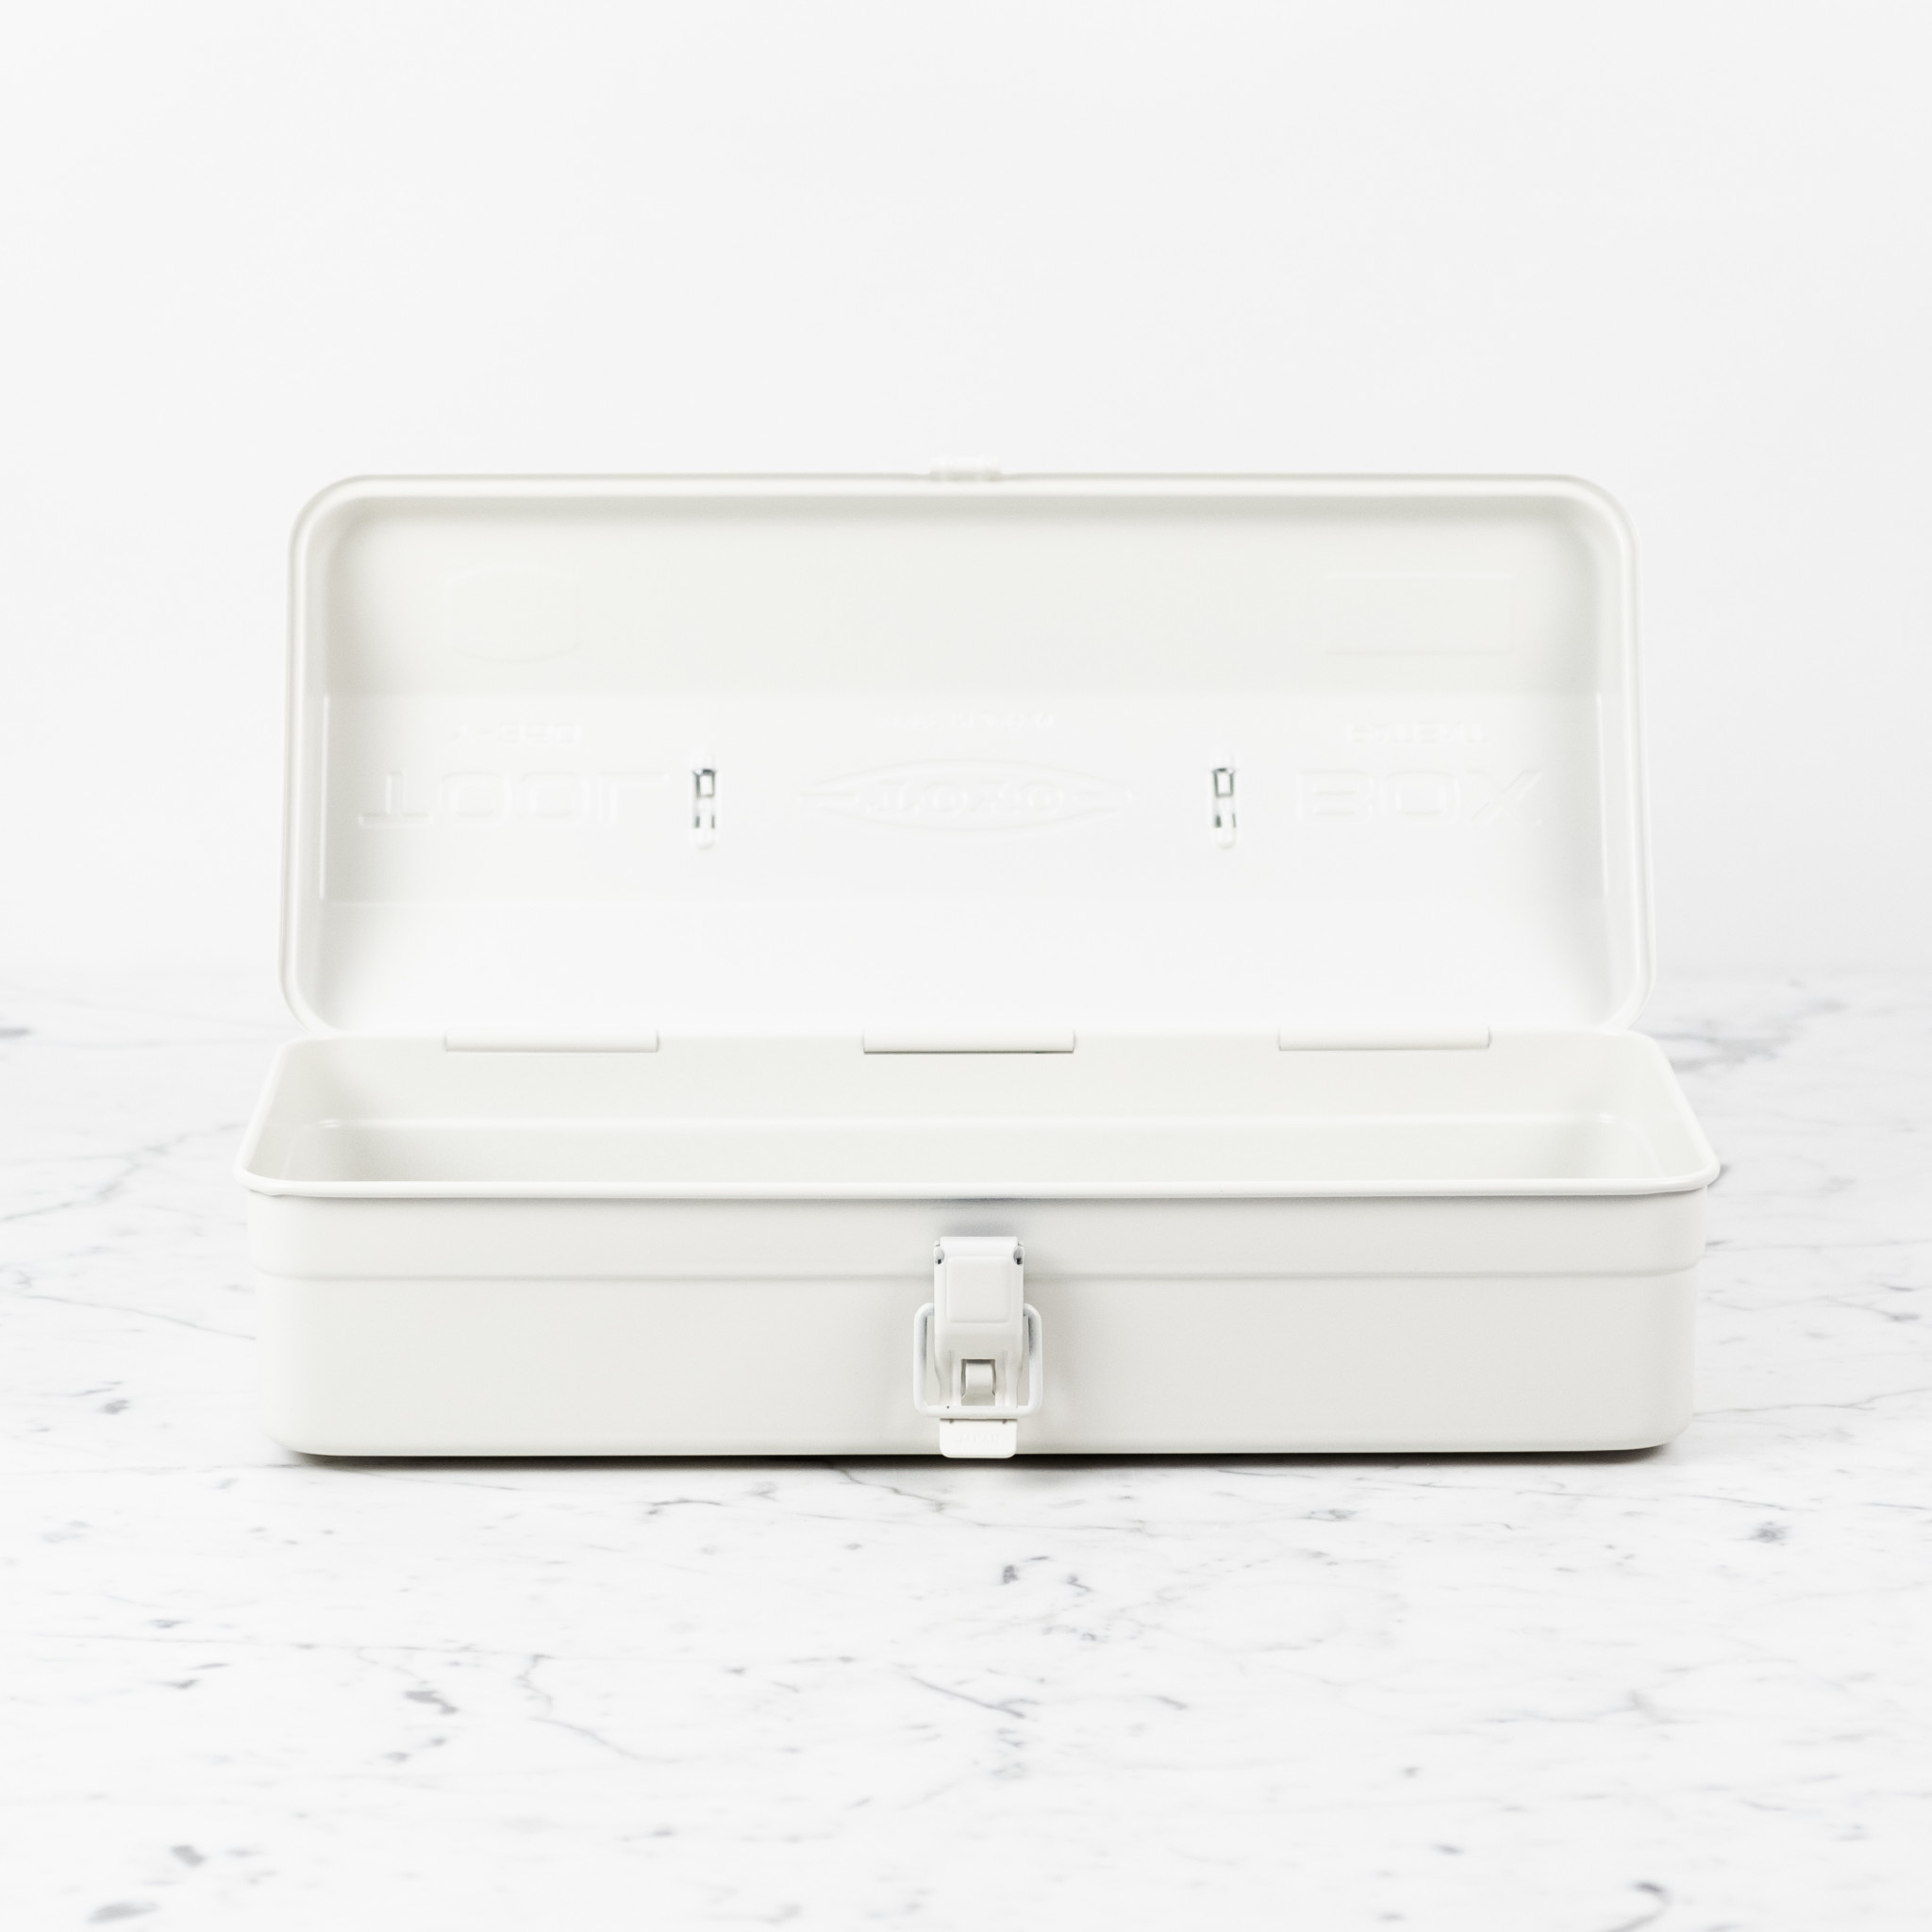 Toyo Japanese Steel Tool Box with Latch - Style Y-350 - White - 14"